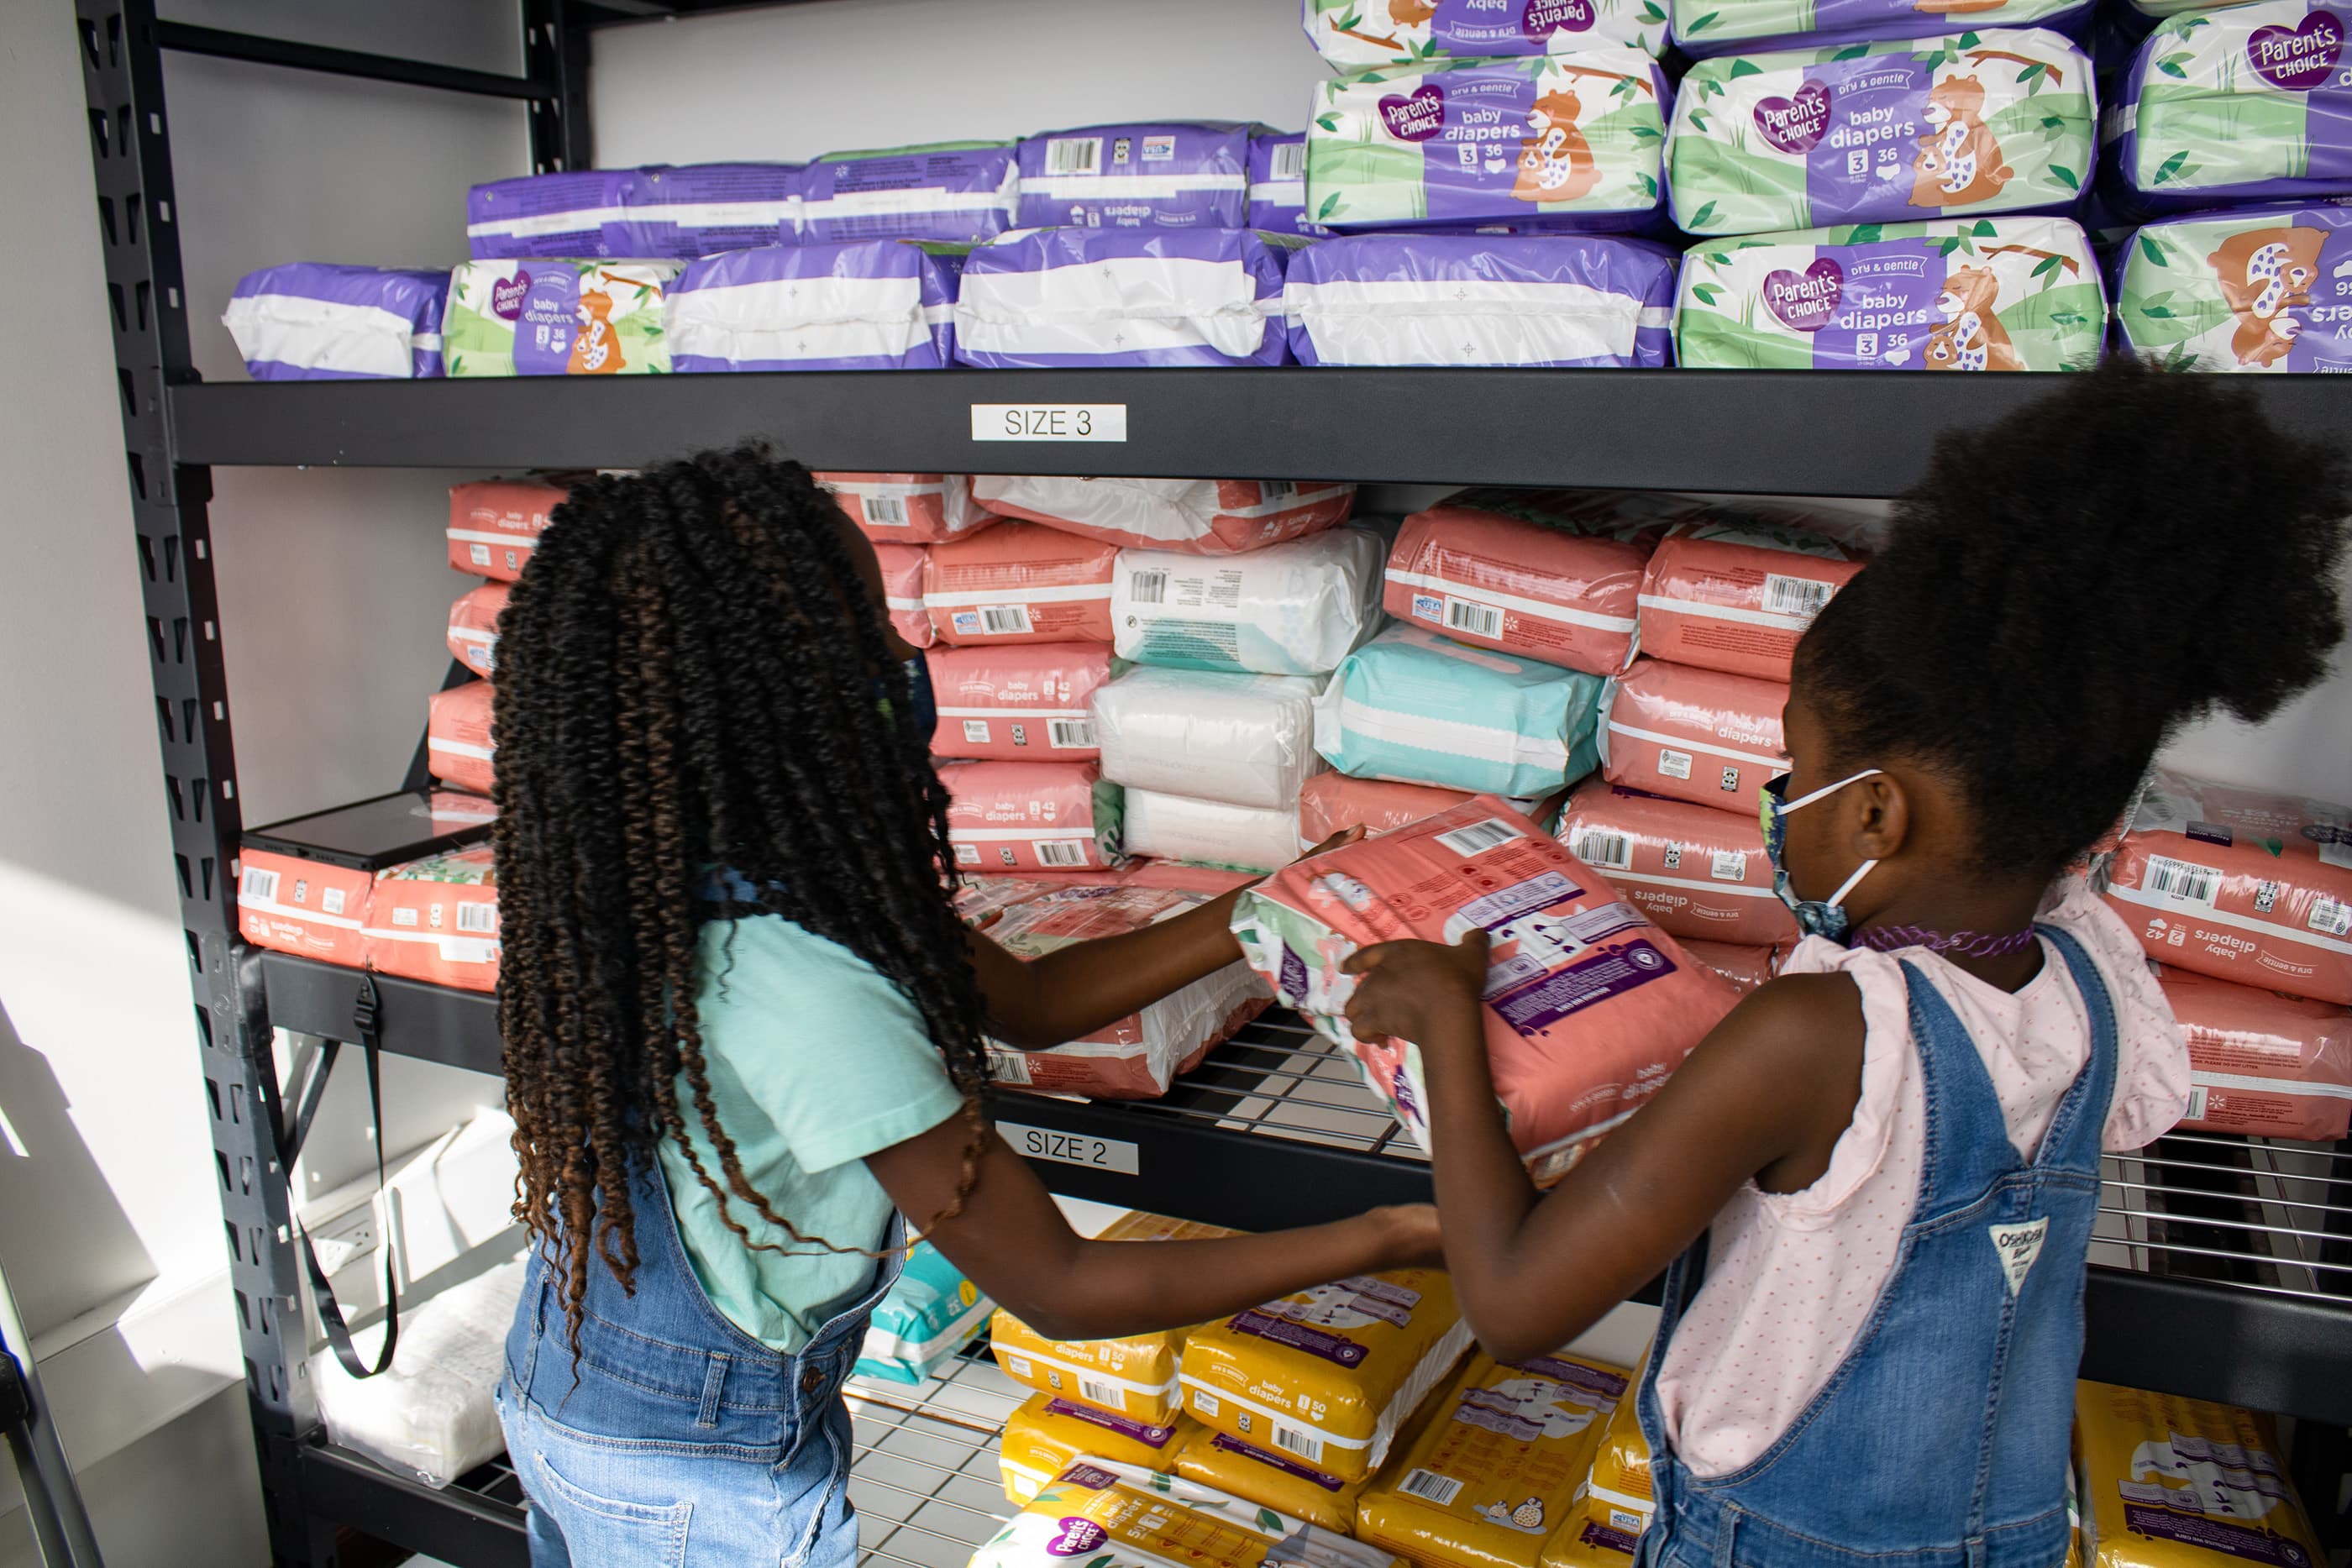 Chantal Alison-Konteh and her two children, Zoe, 9 and Zara, 7, relied on diaper banks when the girls were babies. Now it's a full-circle moment with her daughters helping her distribute diapers to families who need help. (Courtesy of Chantal Alison-Konteh)